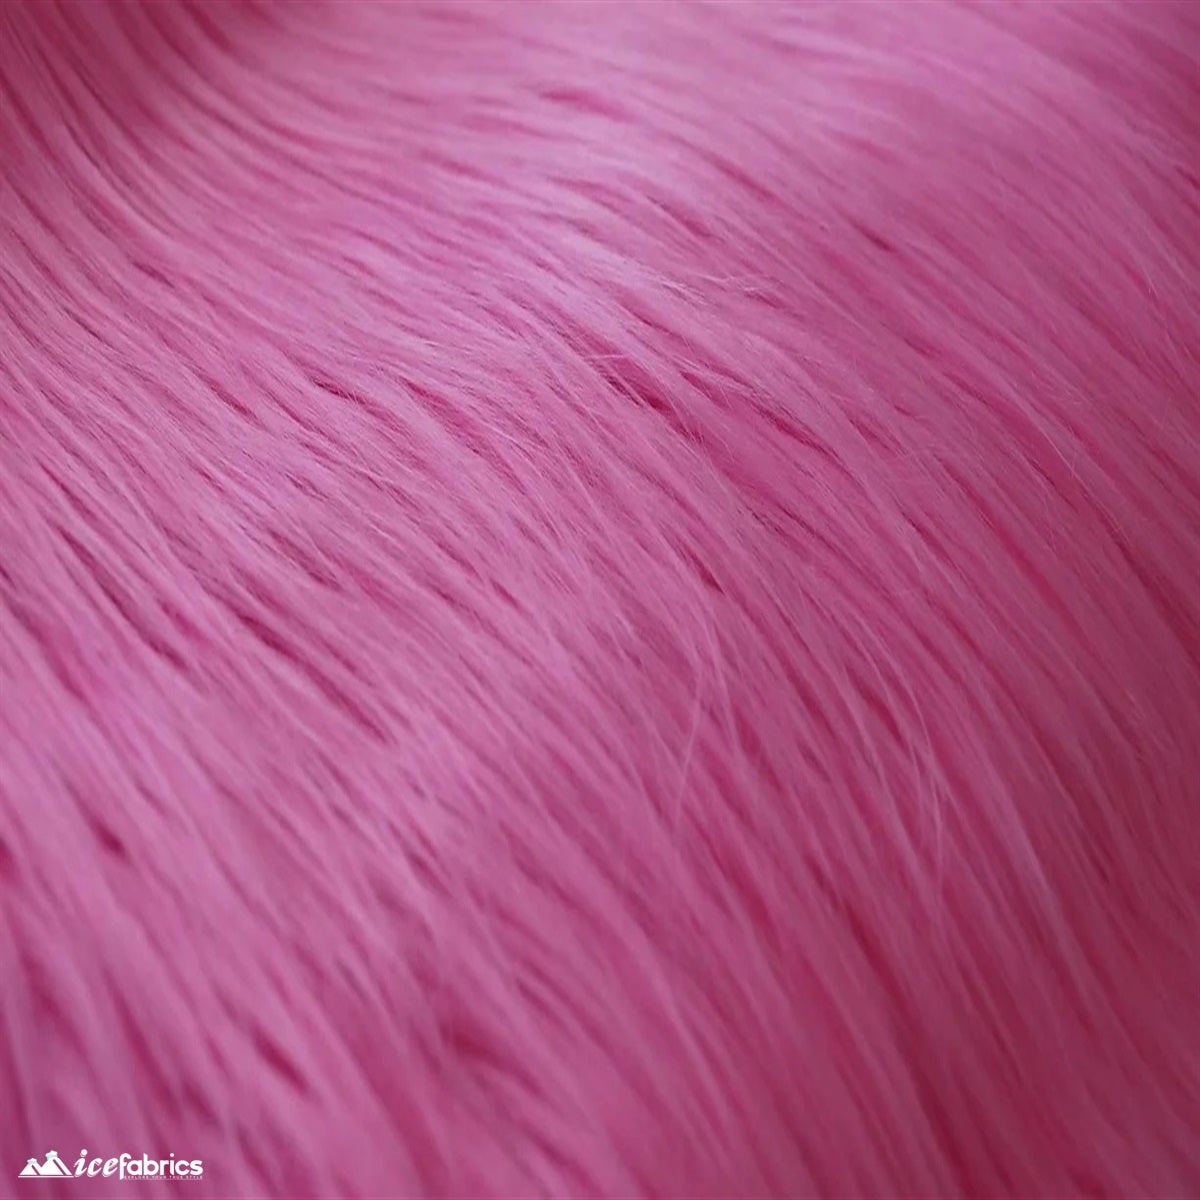 Mohair Faux Fur Fabric By The Roll (20 Yards) 4 Inch PileICE FABRICSICE FABRICSHot PinkBy The Roll (60" Wide)Mohair Faux Fur Fabric By The Roll (20 Yards) 4 Inch Pile ICE FABRICS